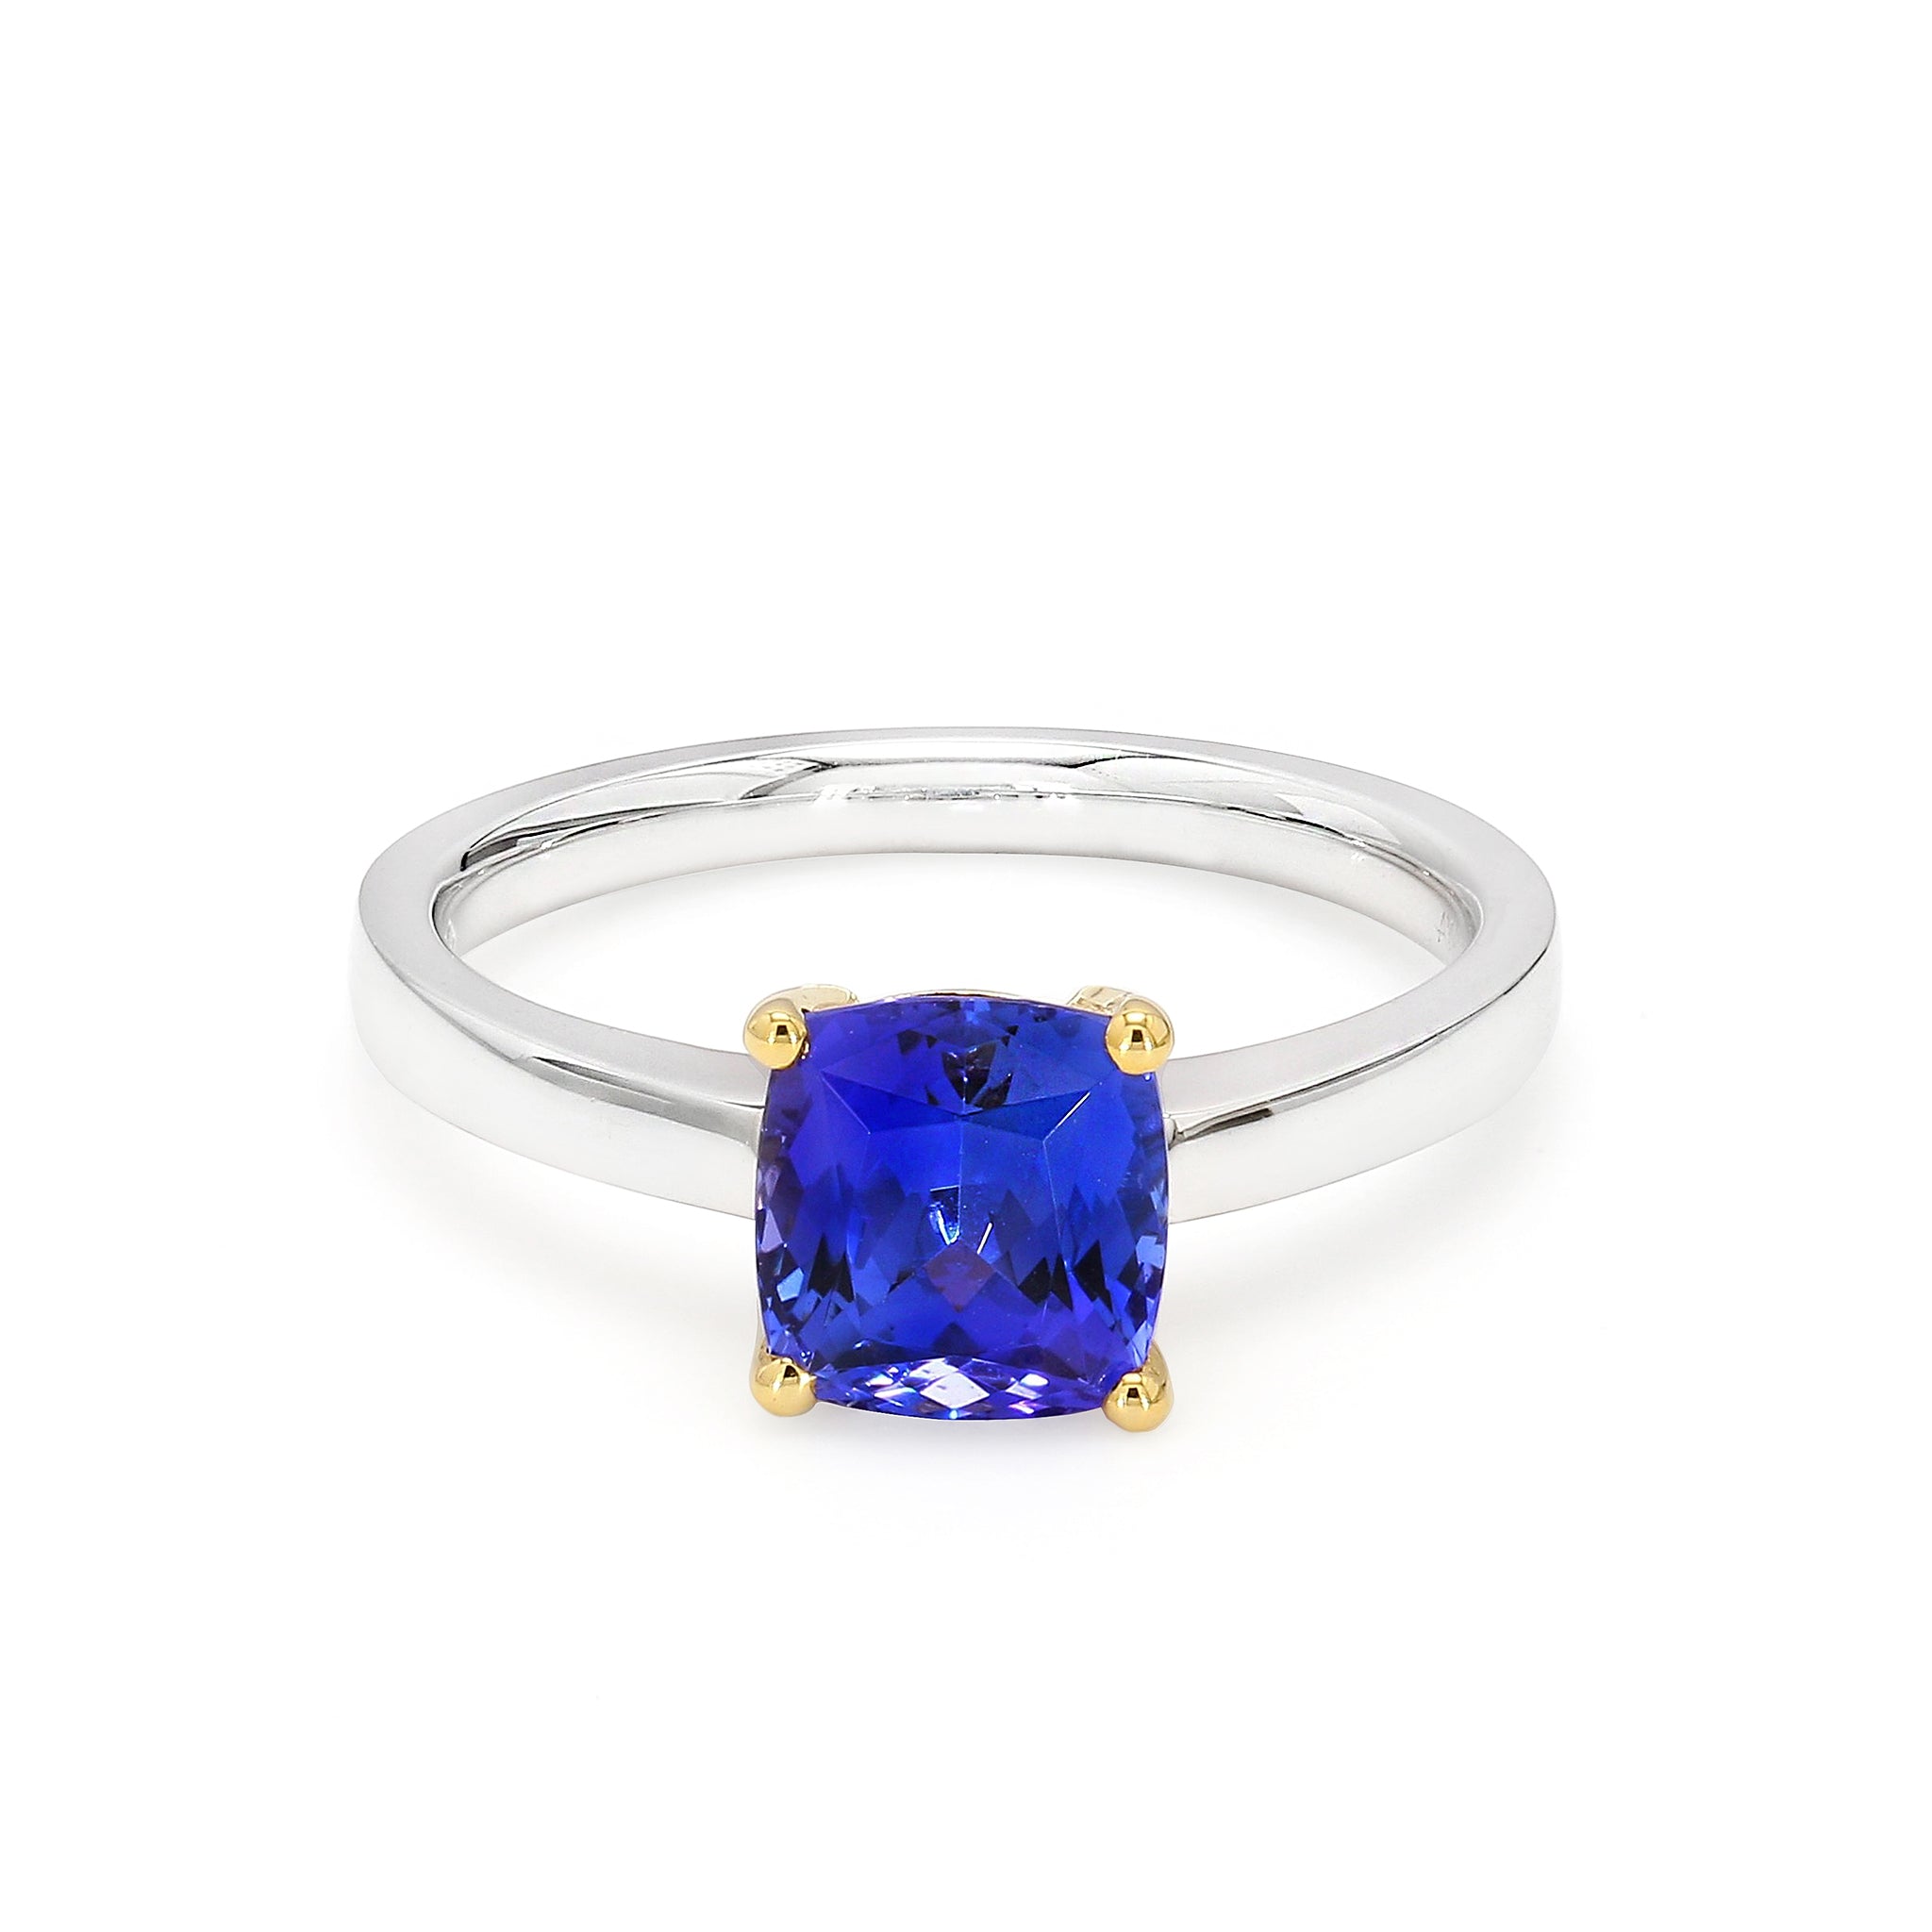 Tanzanite Cushion Cut Solitaire Ring 1.70ct crafted in 18K White and Yellow Gold